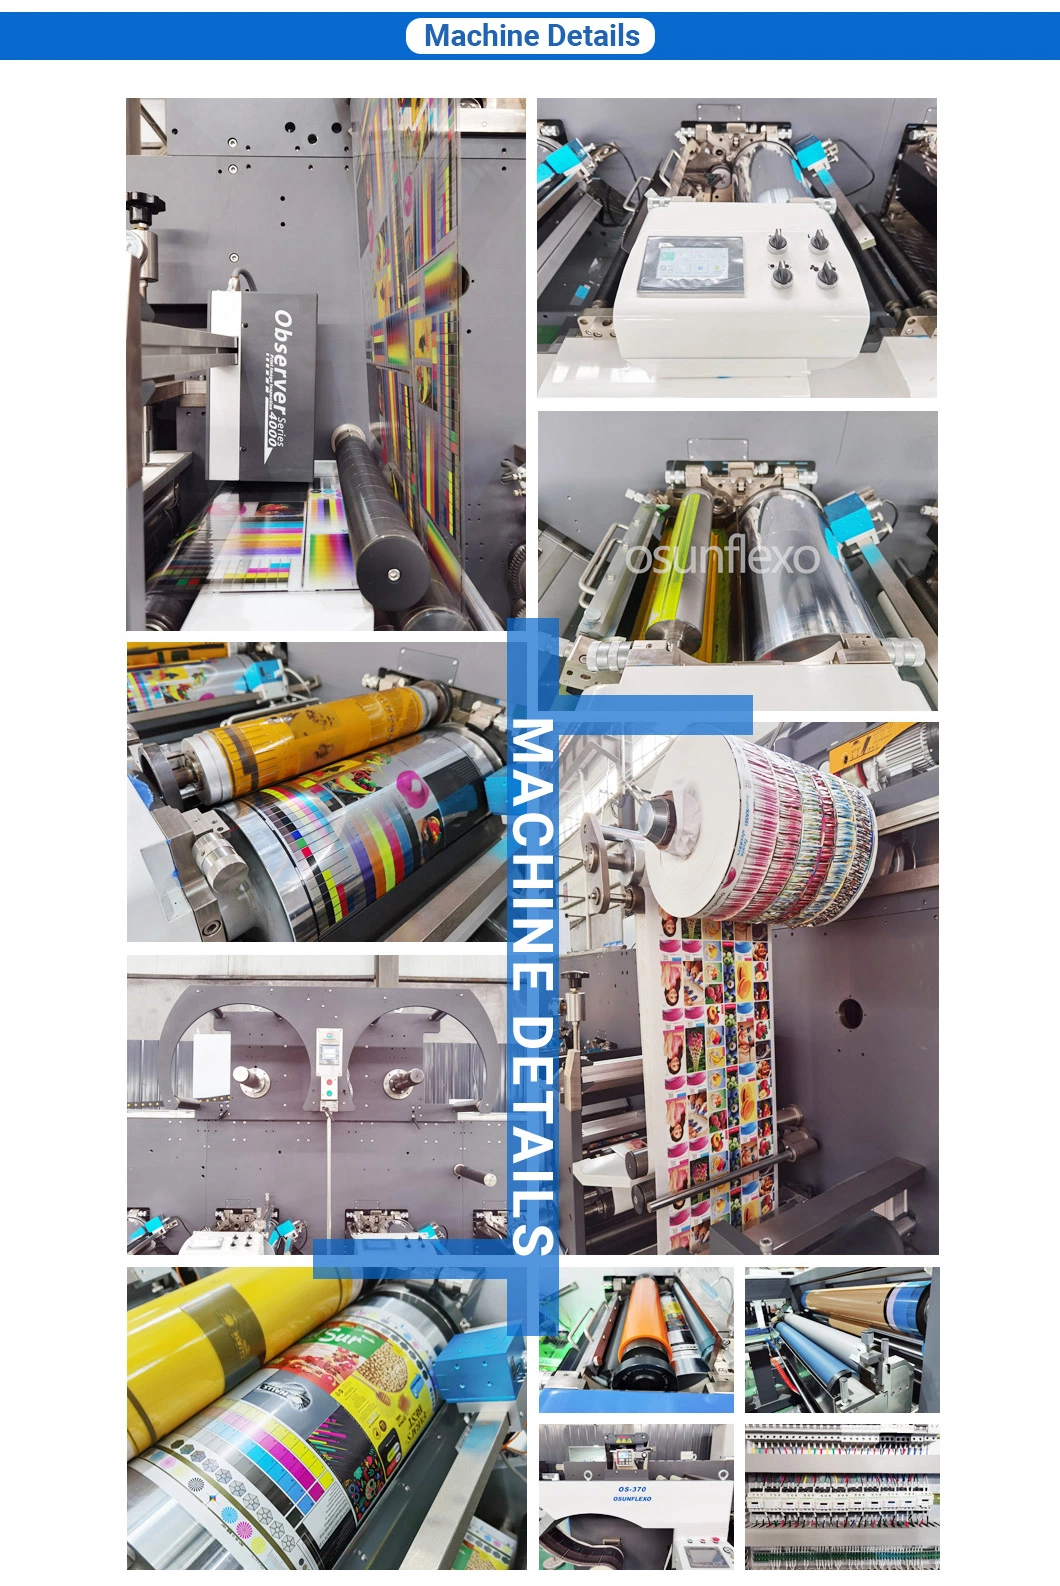 Great Mechanical Property Specialized Designed Rotary Die Cutting Creasing Machine